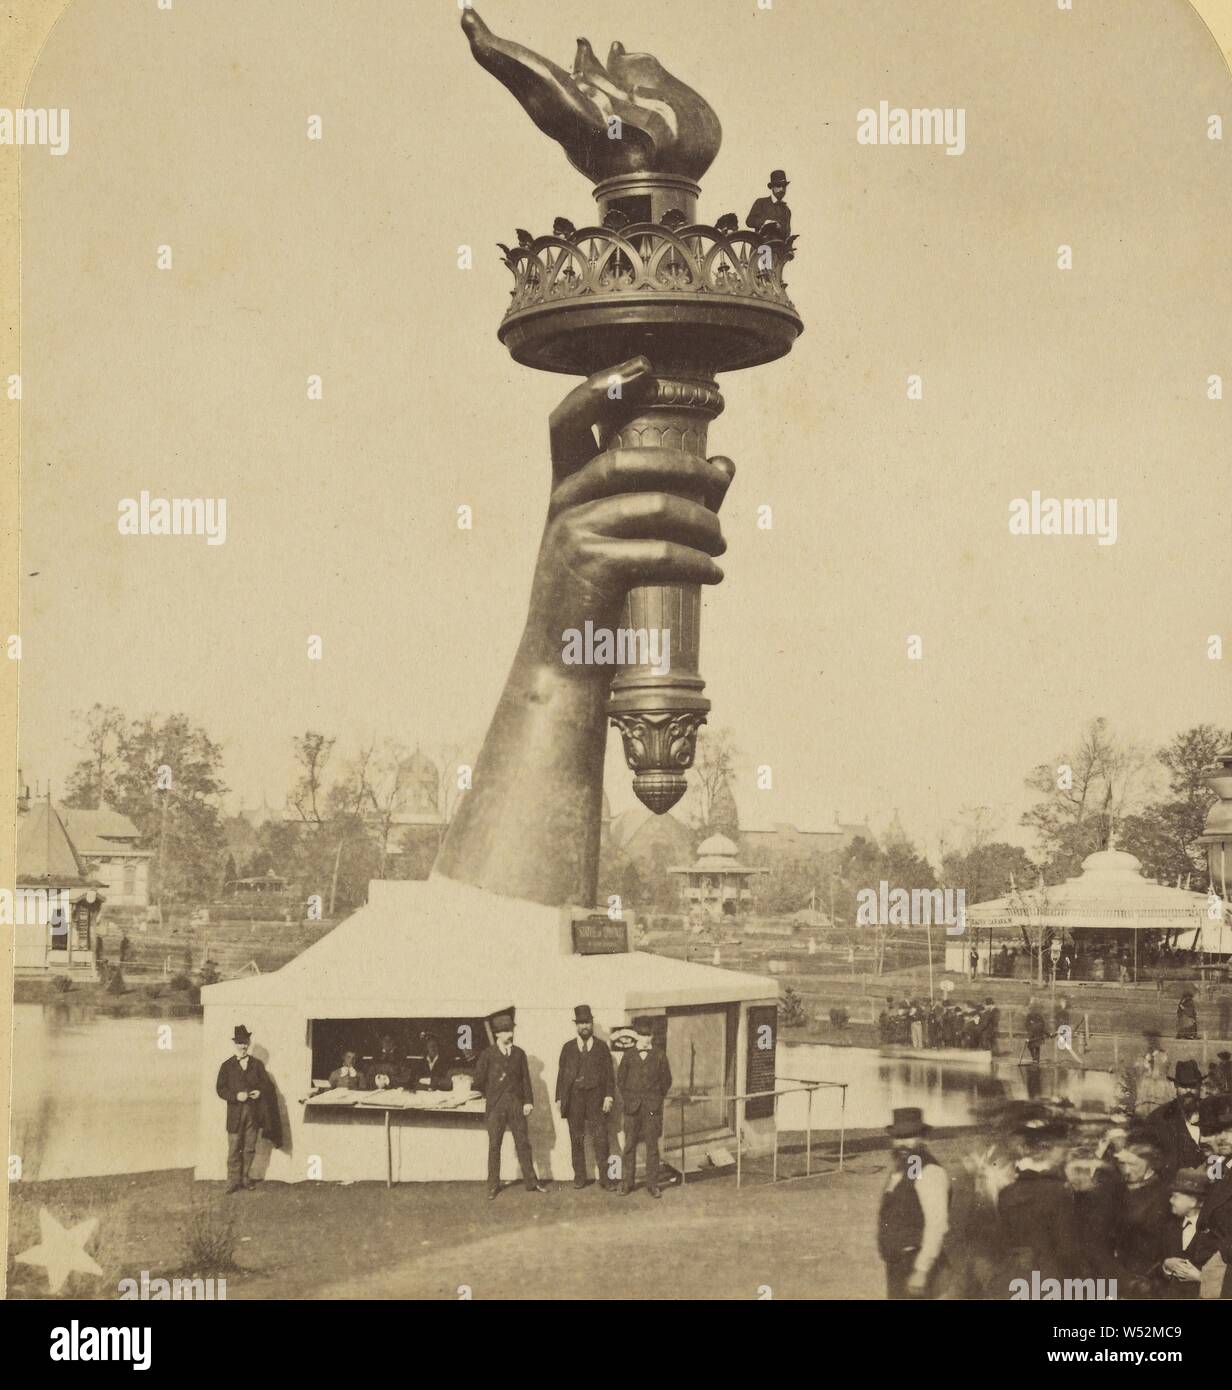 Colossal Hand and Torch Liberty, Centennial Photographic Co. (American, about 1876 - 1890), H.W. Hayt (American, active Philadelphia, Pennsylvania 1870s), 1876, Albumen silver print Stock Photo